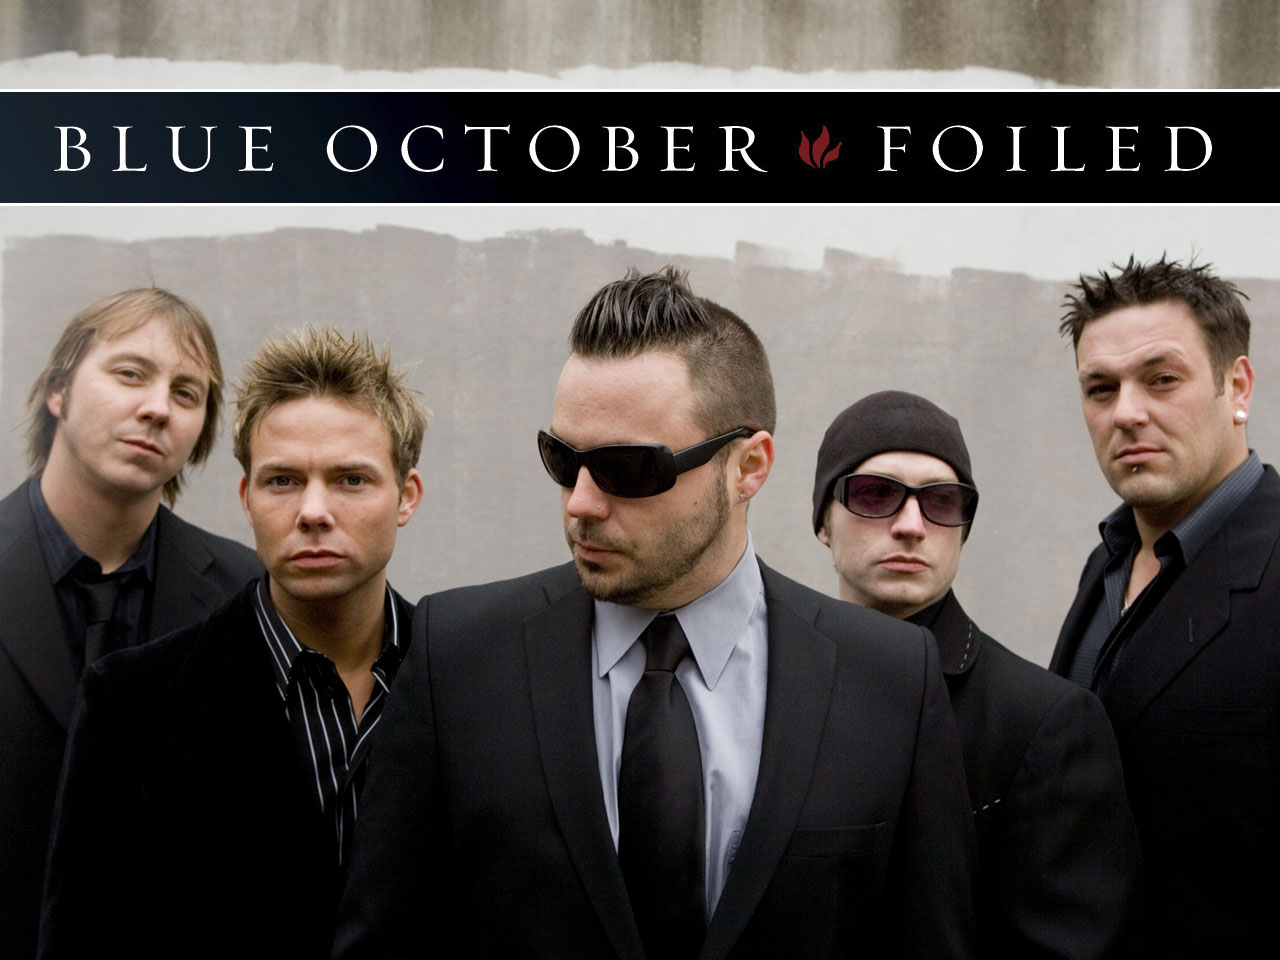 Blue October Image HD Wallpaper And